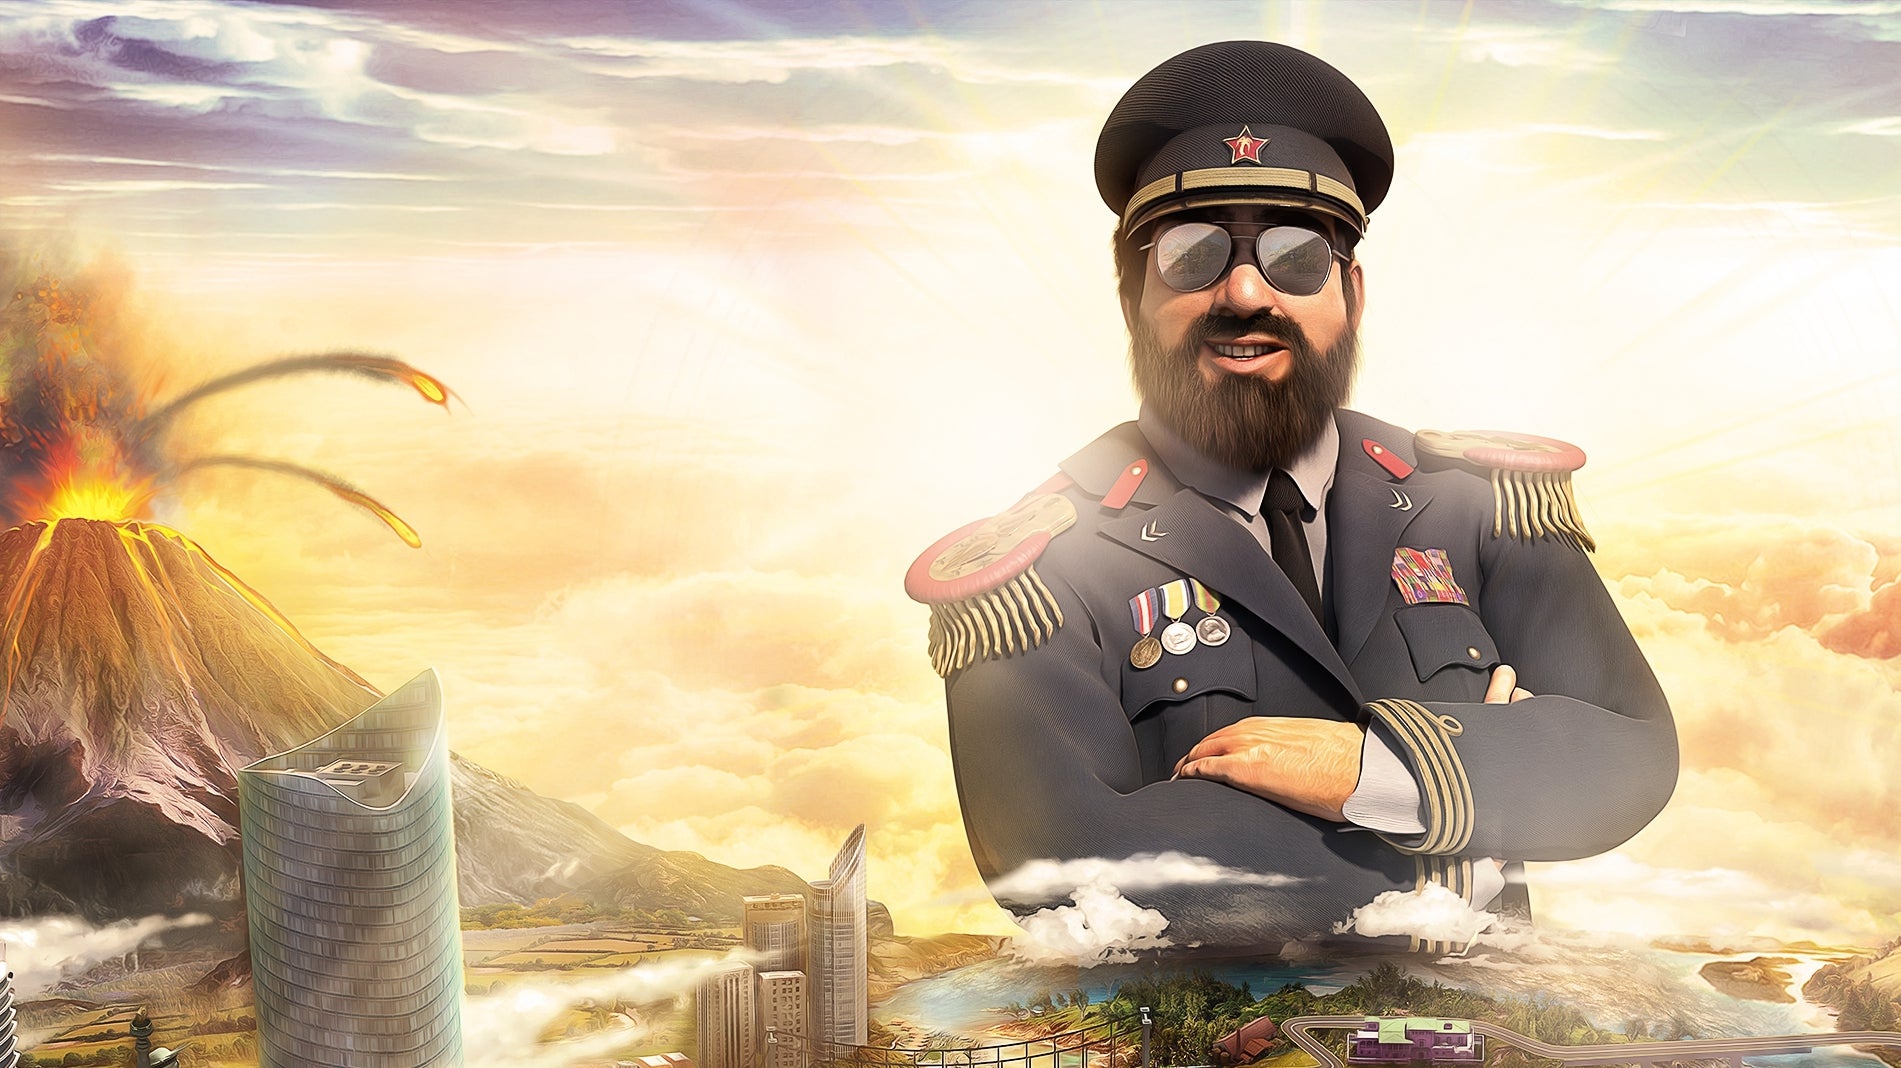 Image for Tropico 6 delayed again